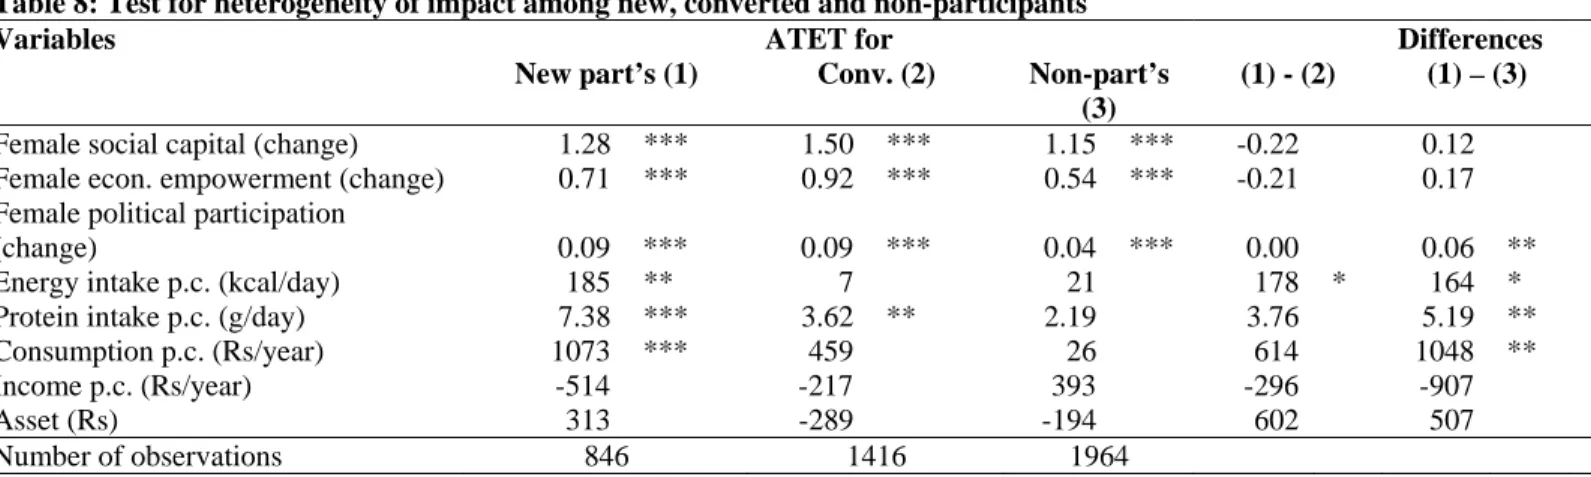 Table 8: Test for heterogeneity of impact among new, converted and non-participants  